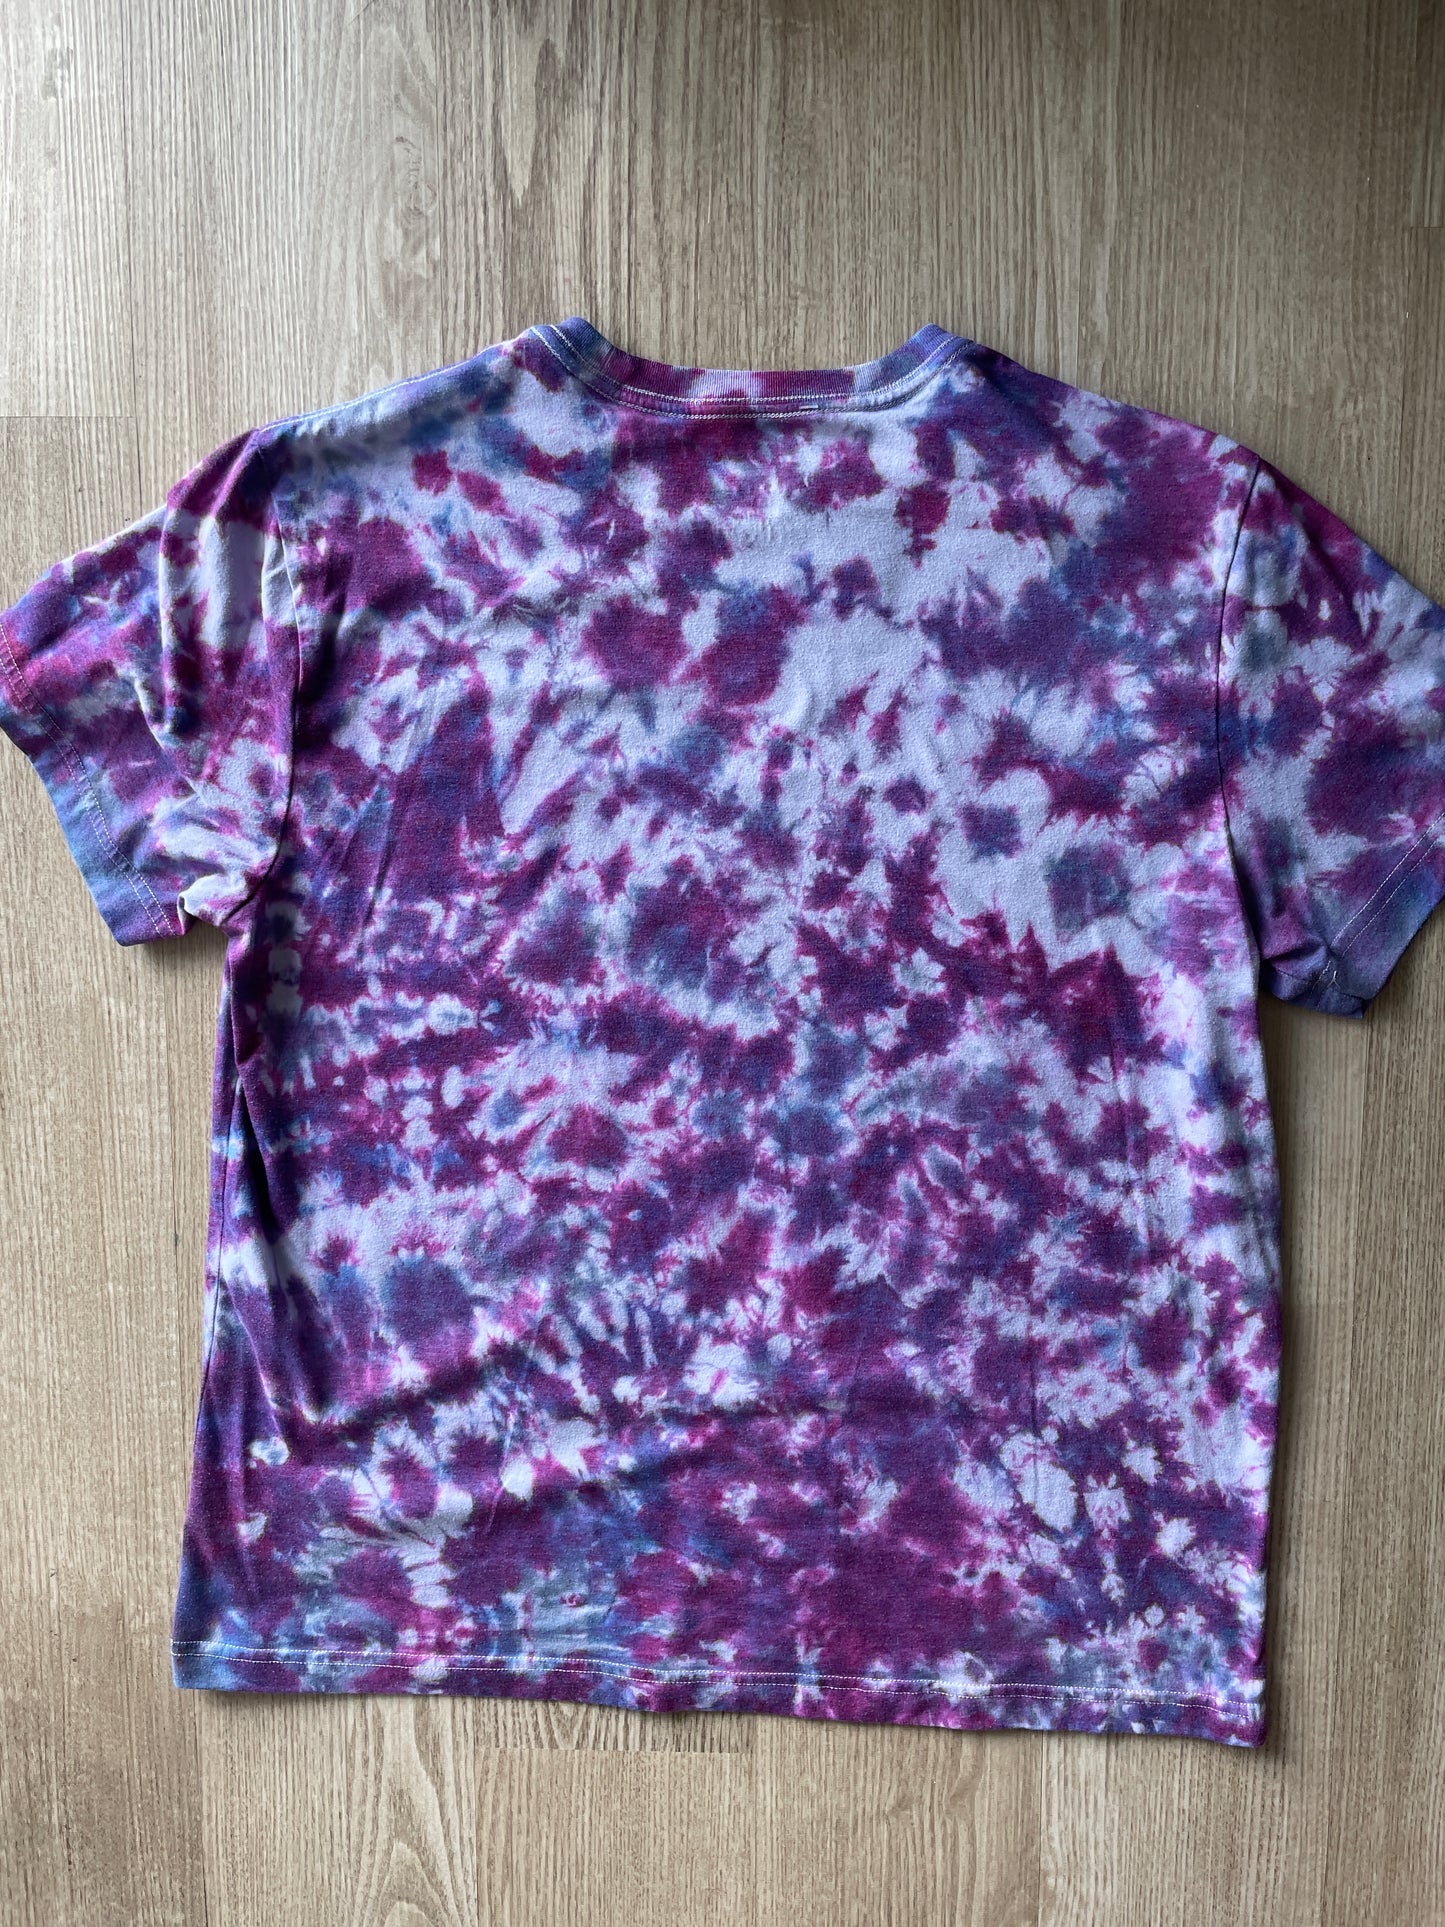 LARGE Men's Prickly Pear Cactus Tie Dye T-Shirt | One-Of-a-Kind Shades of Purple Crumpled Short Sleeve